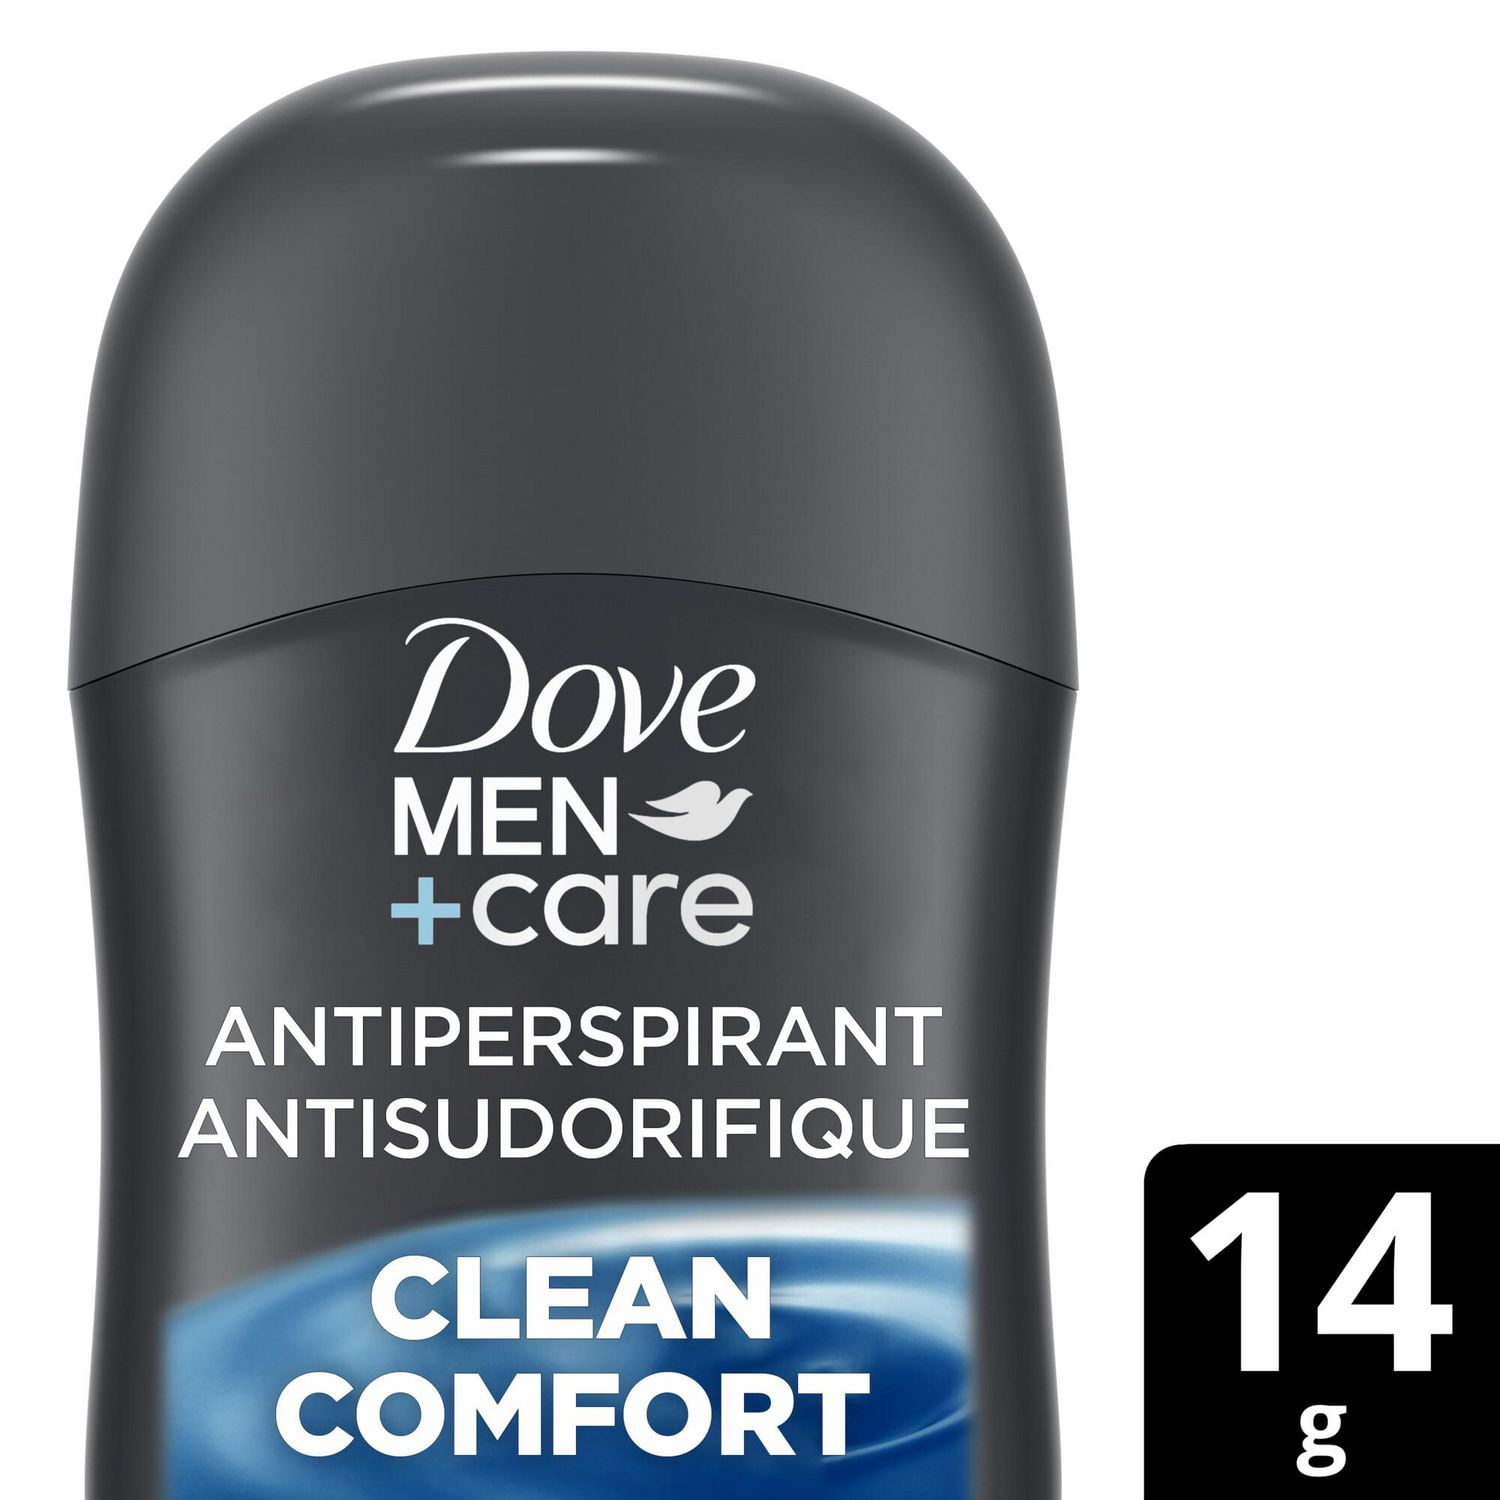 Dove Men+Care with 1/4 Moisturizers and Vitamin E Travel-Size 72h